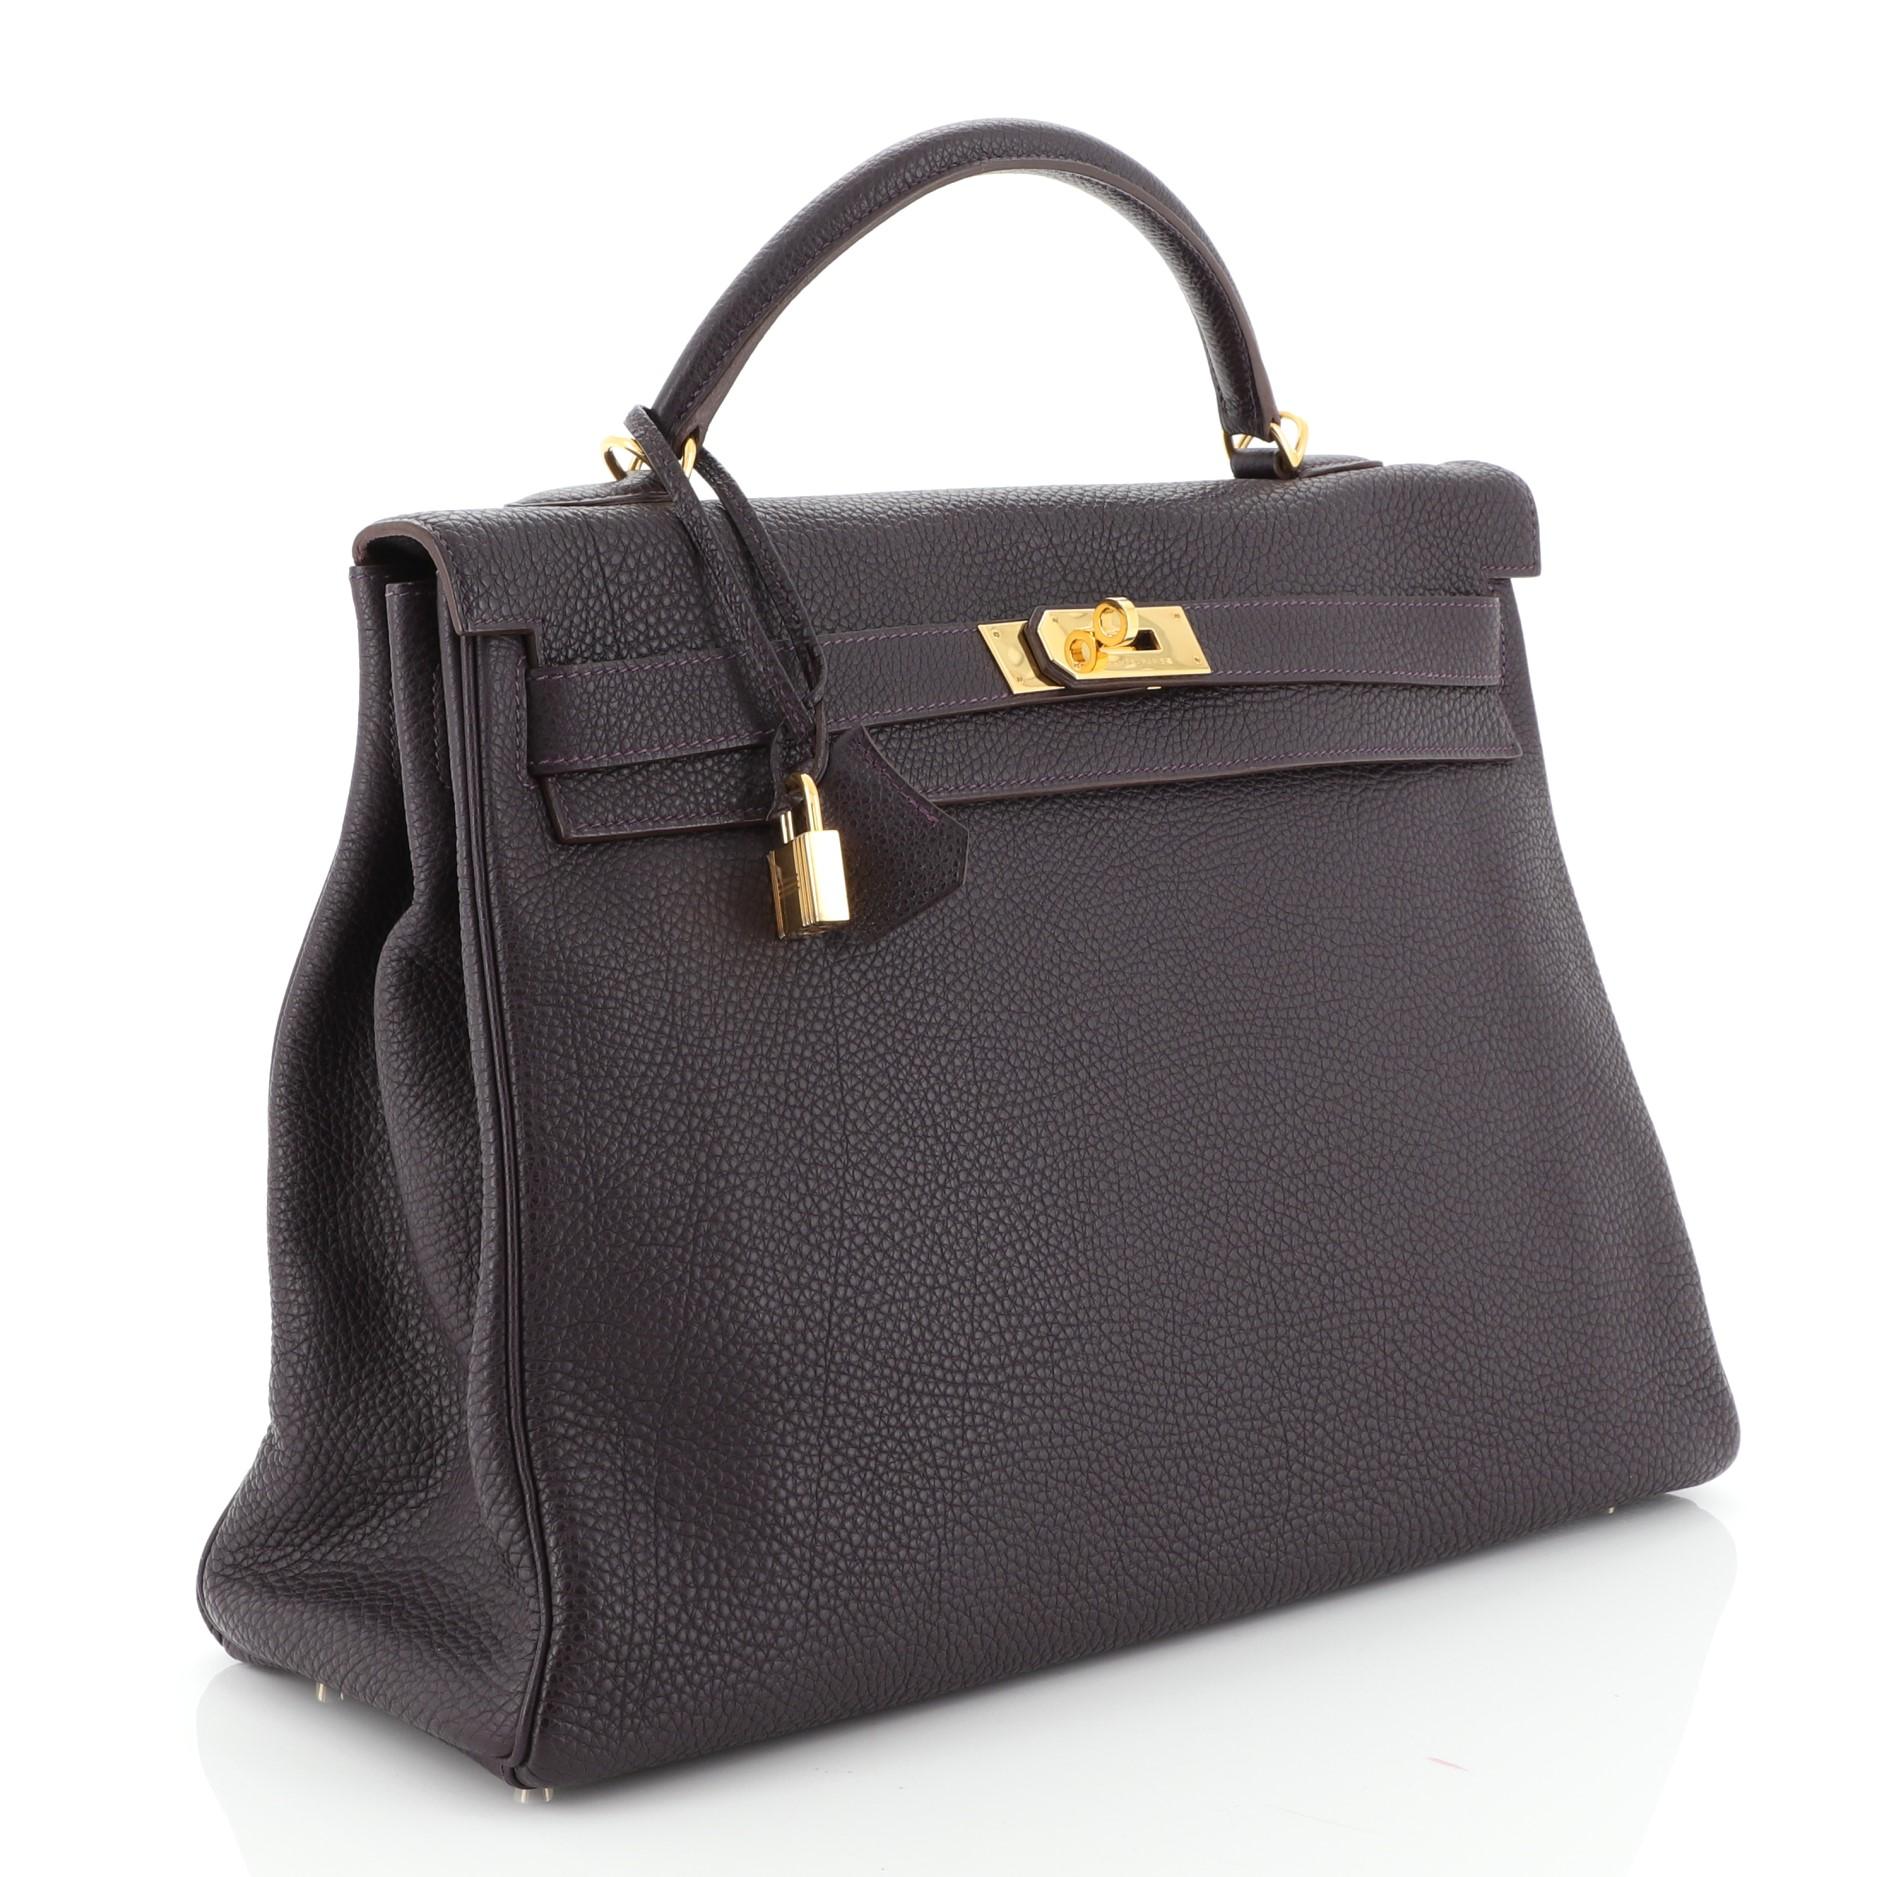 This Hermes Kelly Handbag Raisin Togo with Gold Hardware 40, crafted in Raisin purple Togo leather, features a single rolled top handle, protective base studs, and gold hardware. Its turn-lock closure opens to a Raisin purple Chevre leather interior